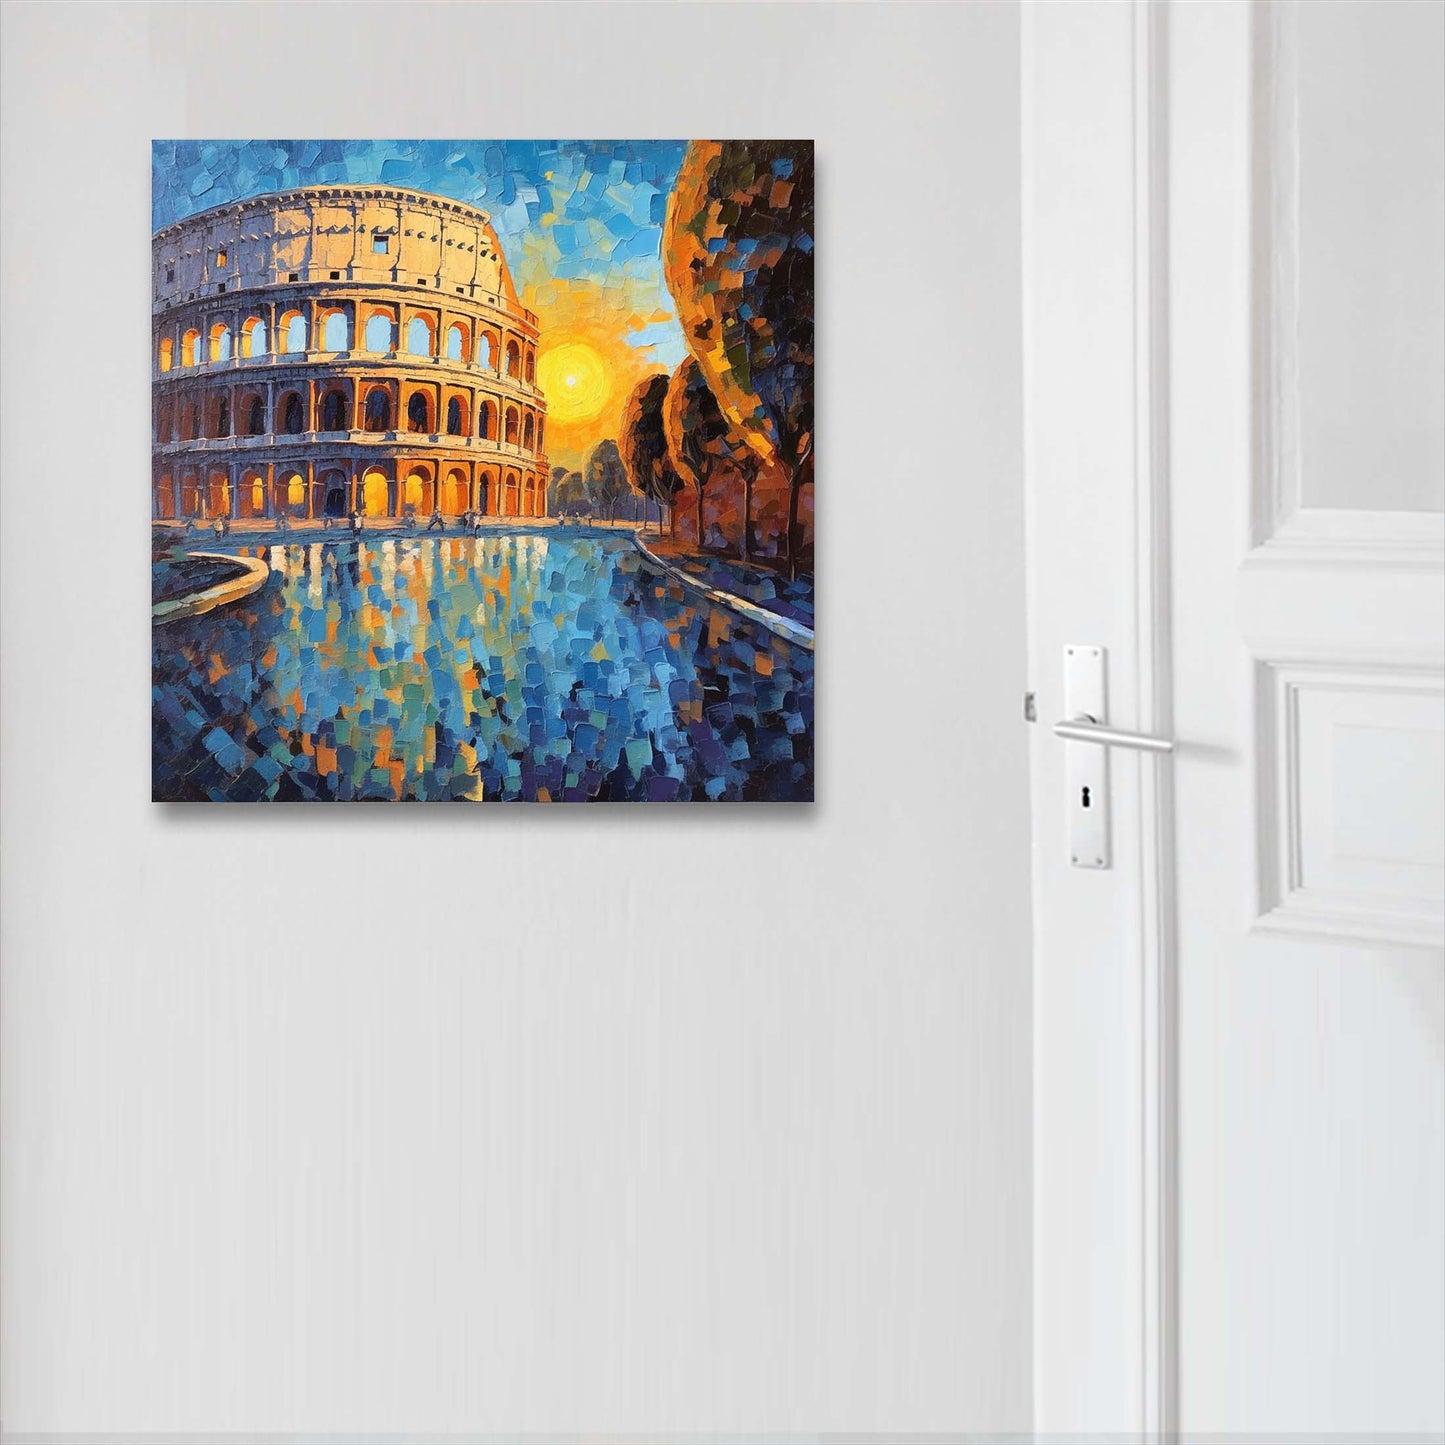 Rome Colosseum - mural in the style of impressionism